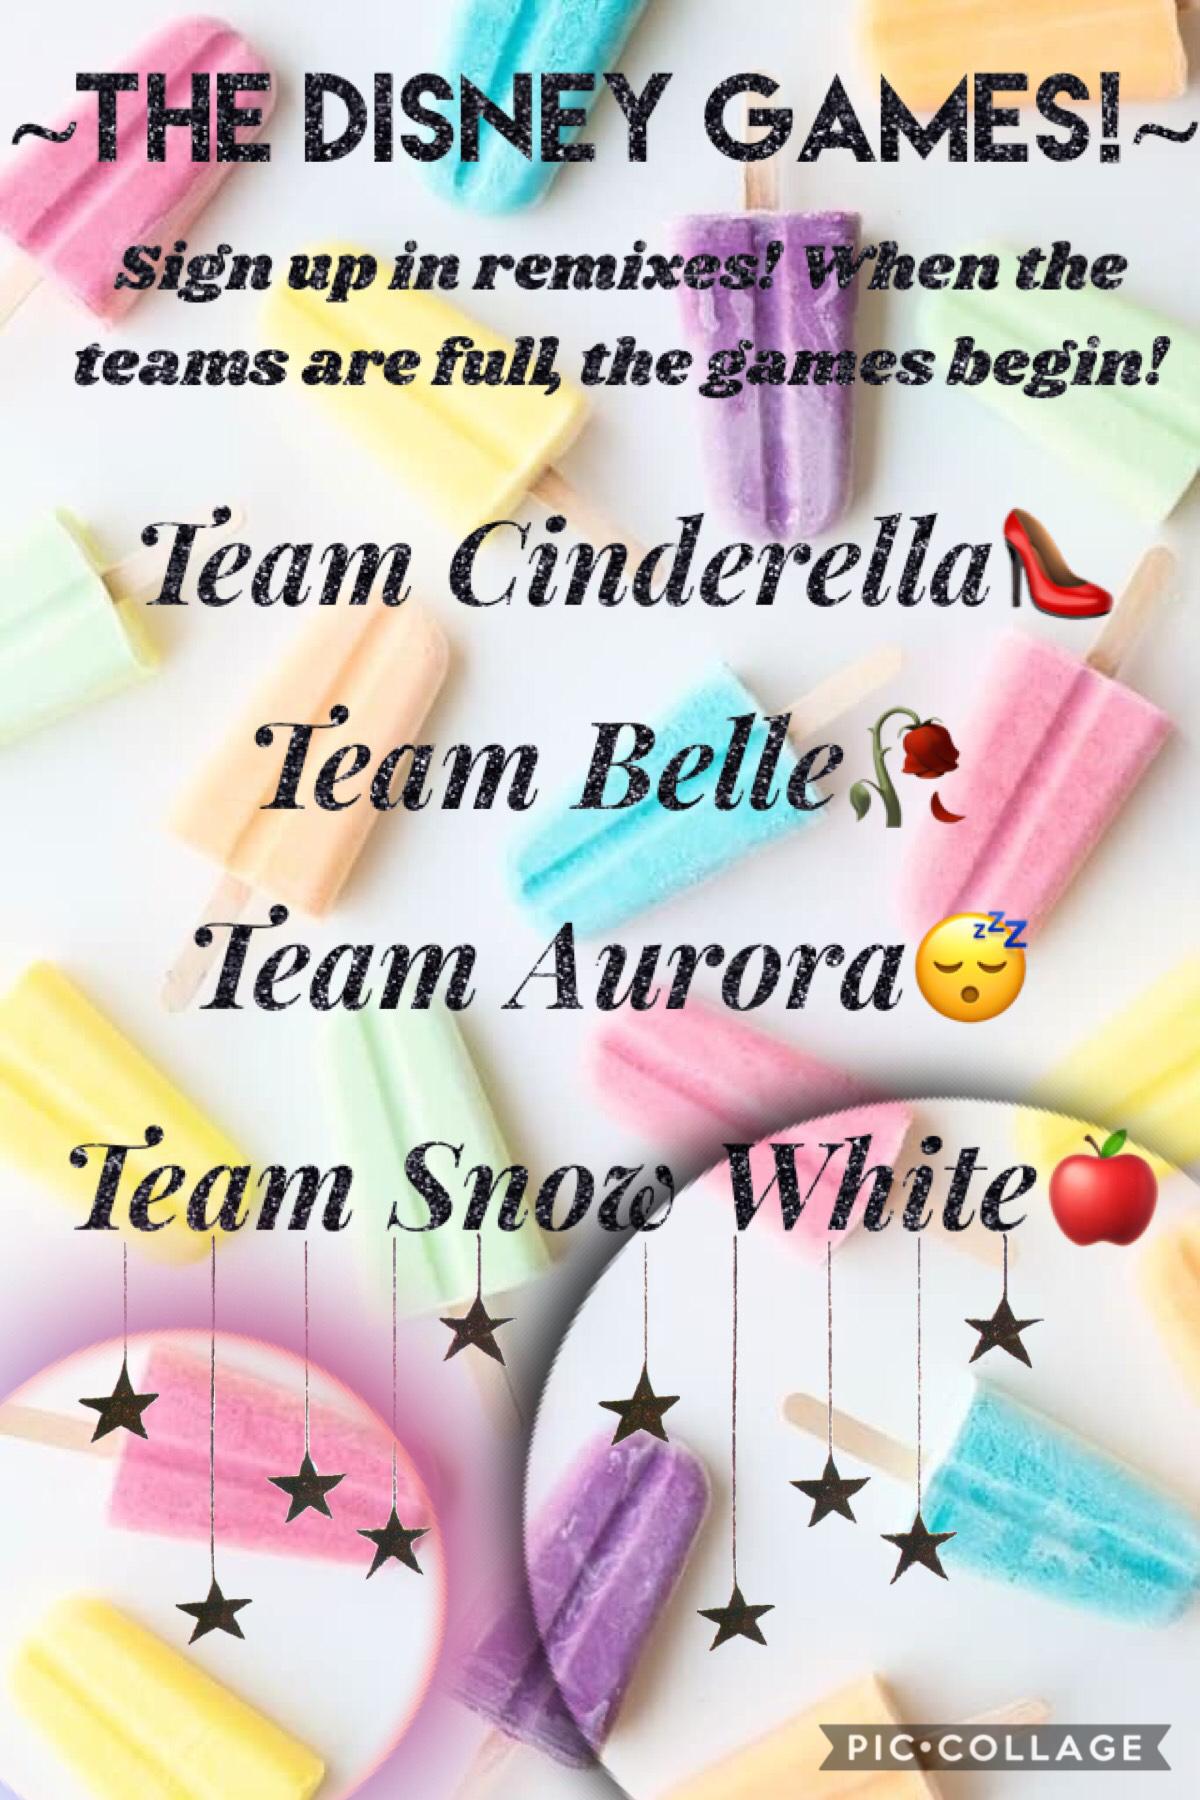 So... I'm redoing this! Each team will have 4 members, make sure to read through the comments to see if teams are full.😄